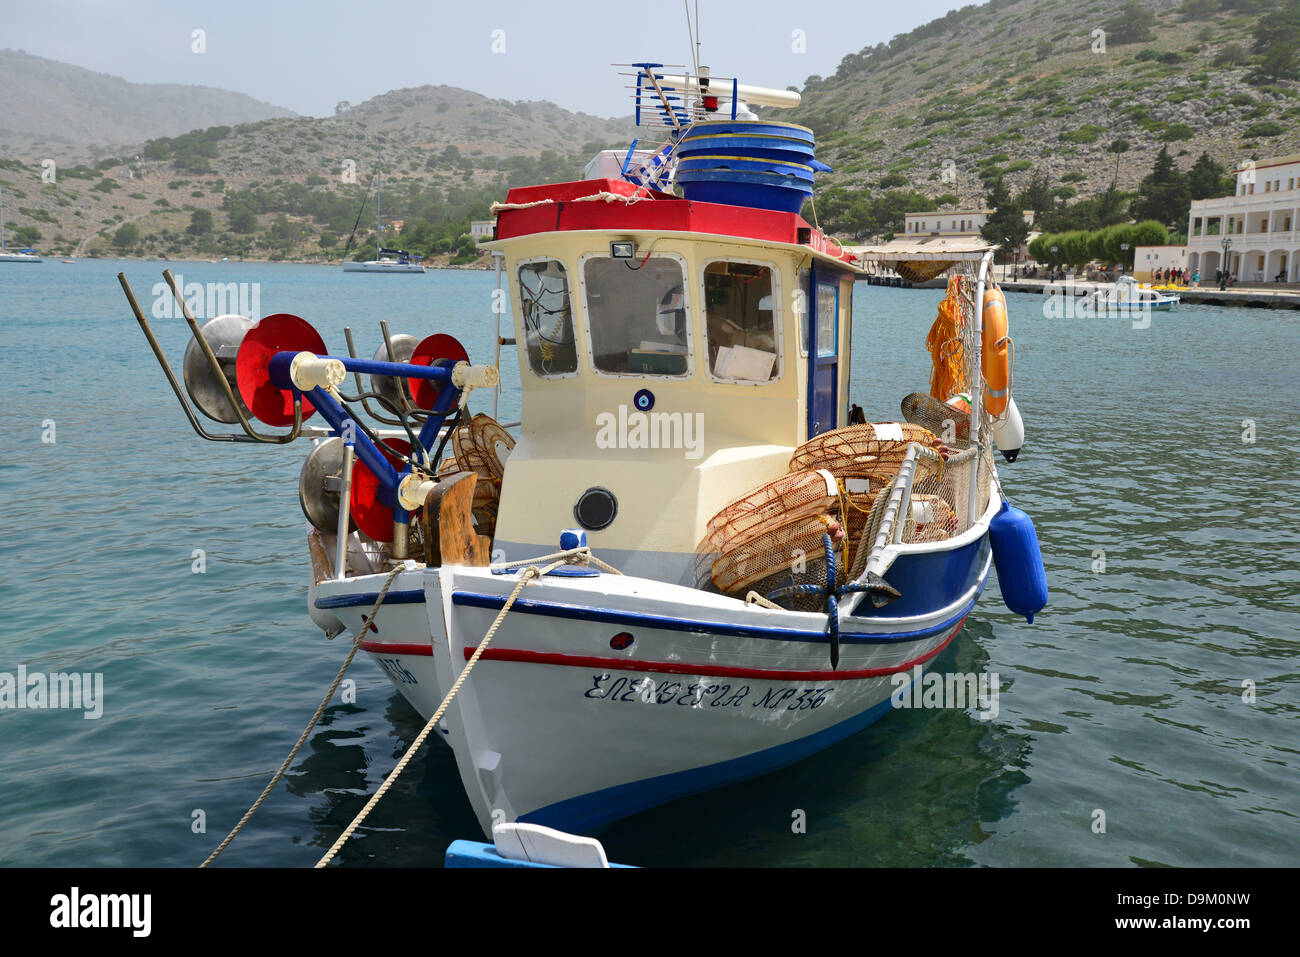 Fishing port at The Monastery of St Michael at Panormitis, Symi (Simi), Rhodes (Rodos) Region, Dodecanese, South Aegean, Greece Stock Photo